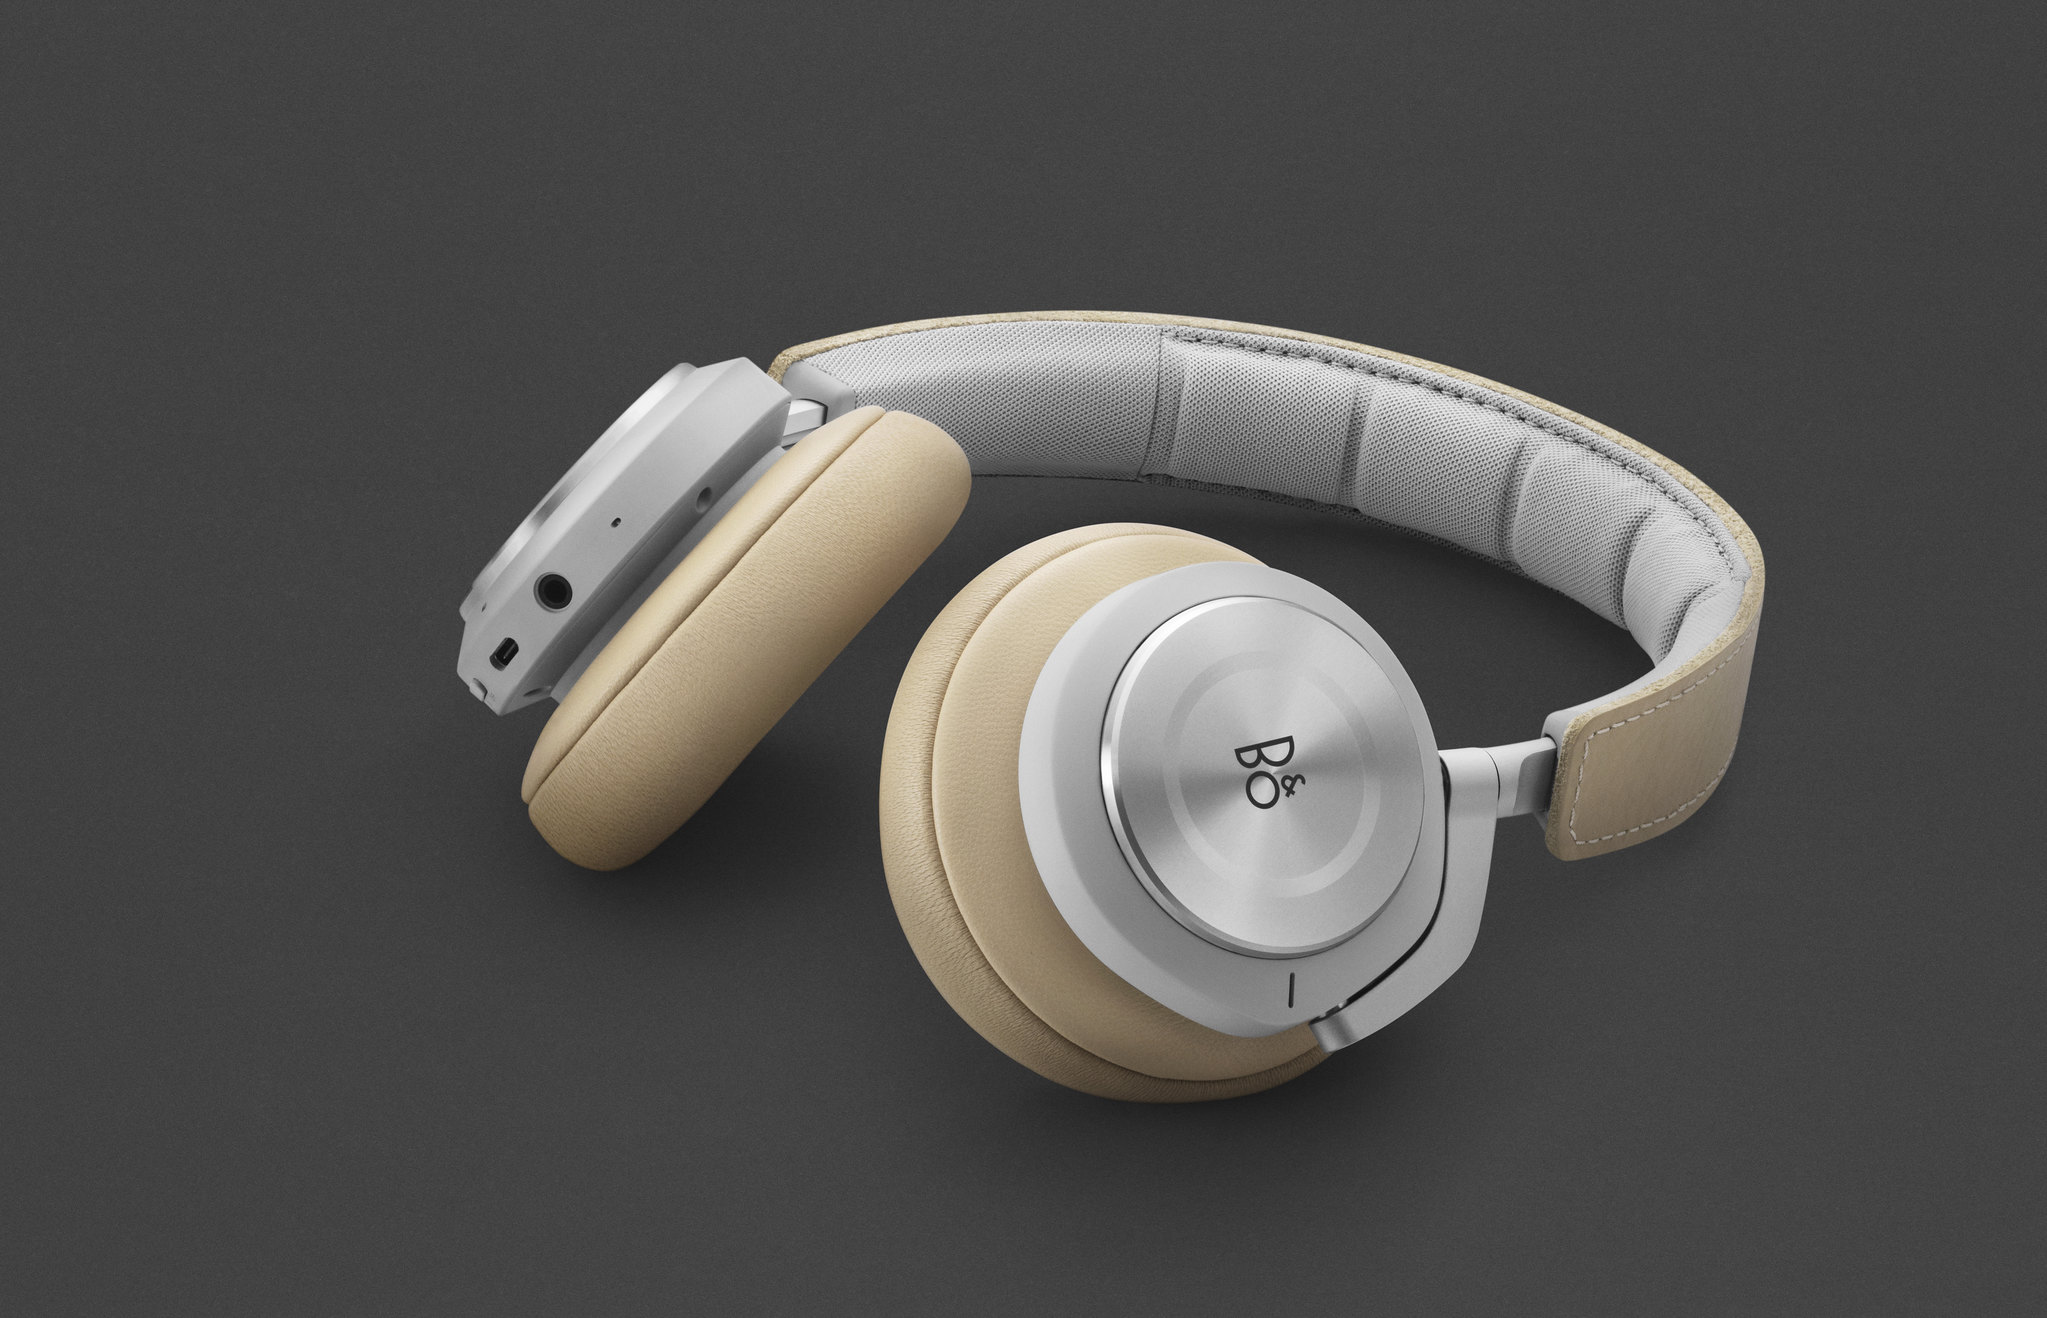 Beoplay H9i – Bang & Olufsen Support